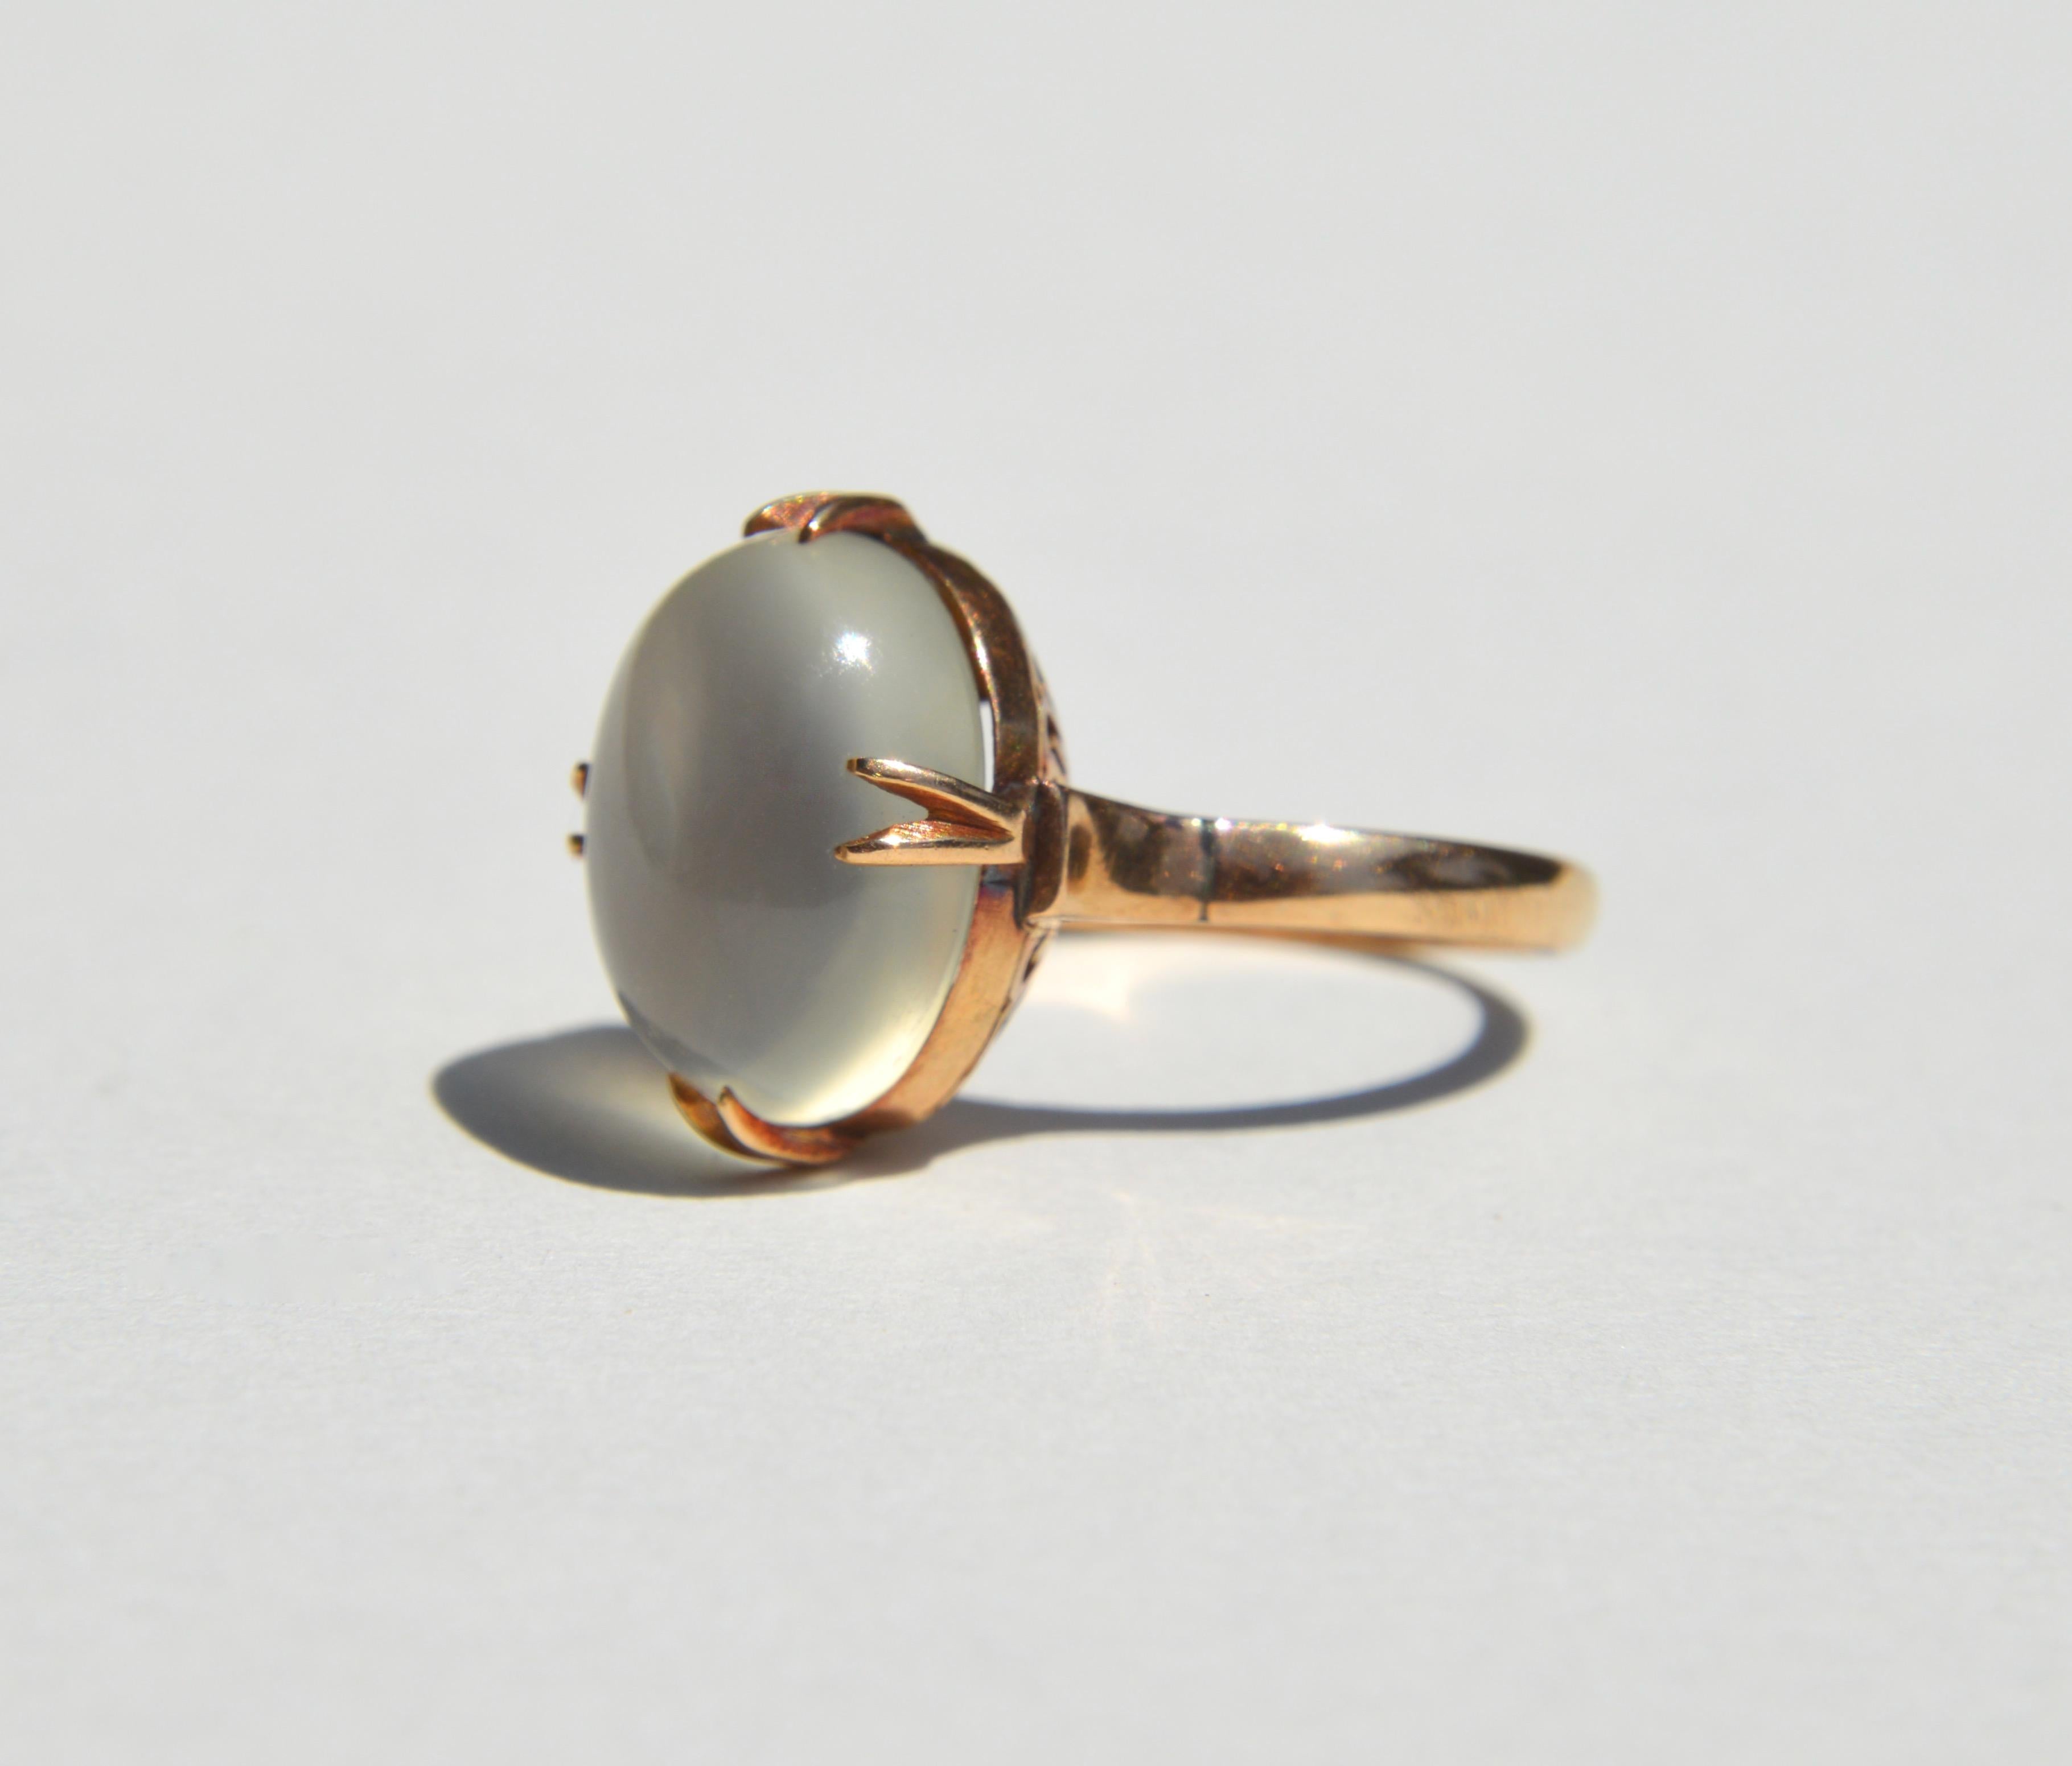 Beautiful antique Edwardian era circa 1910s 6 Carat glowy moonstone cabochon 14K rosegold ring. Size 5.75, can be resized for an additional $40. Moonstone measures 13x10mm. Lovely claw prong setting. In good condition. 